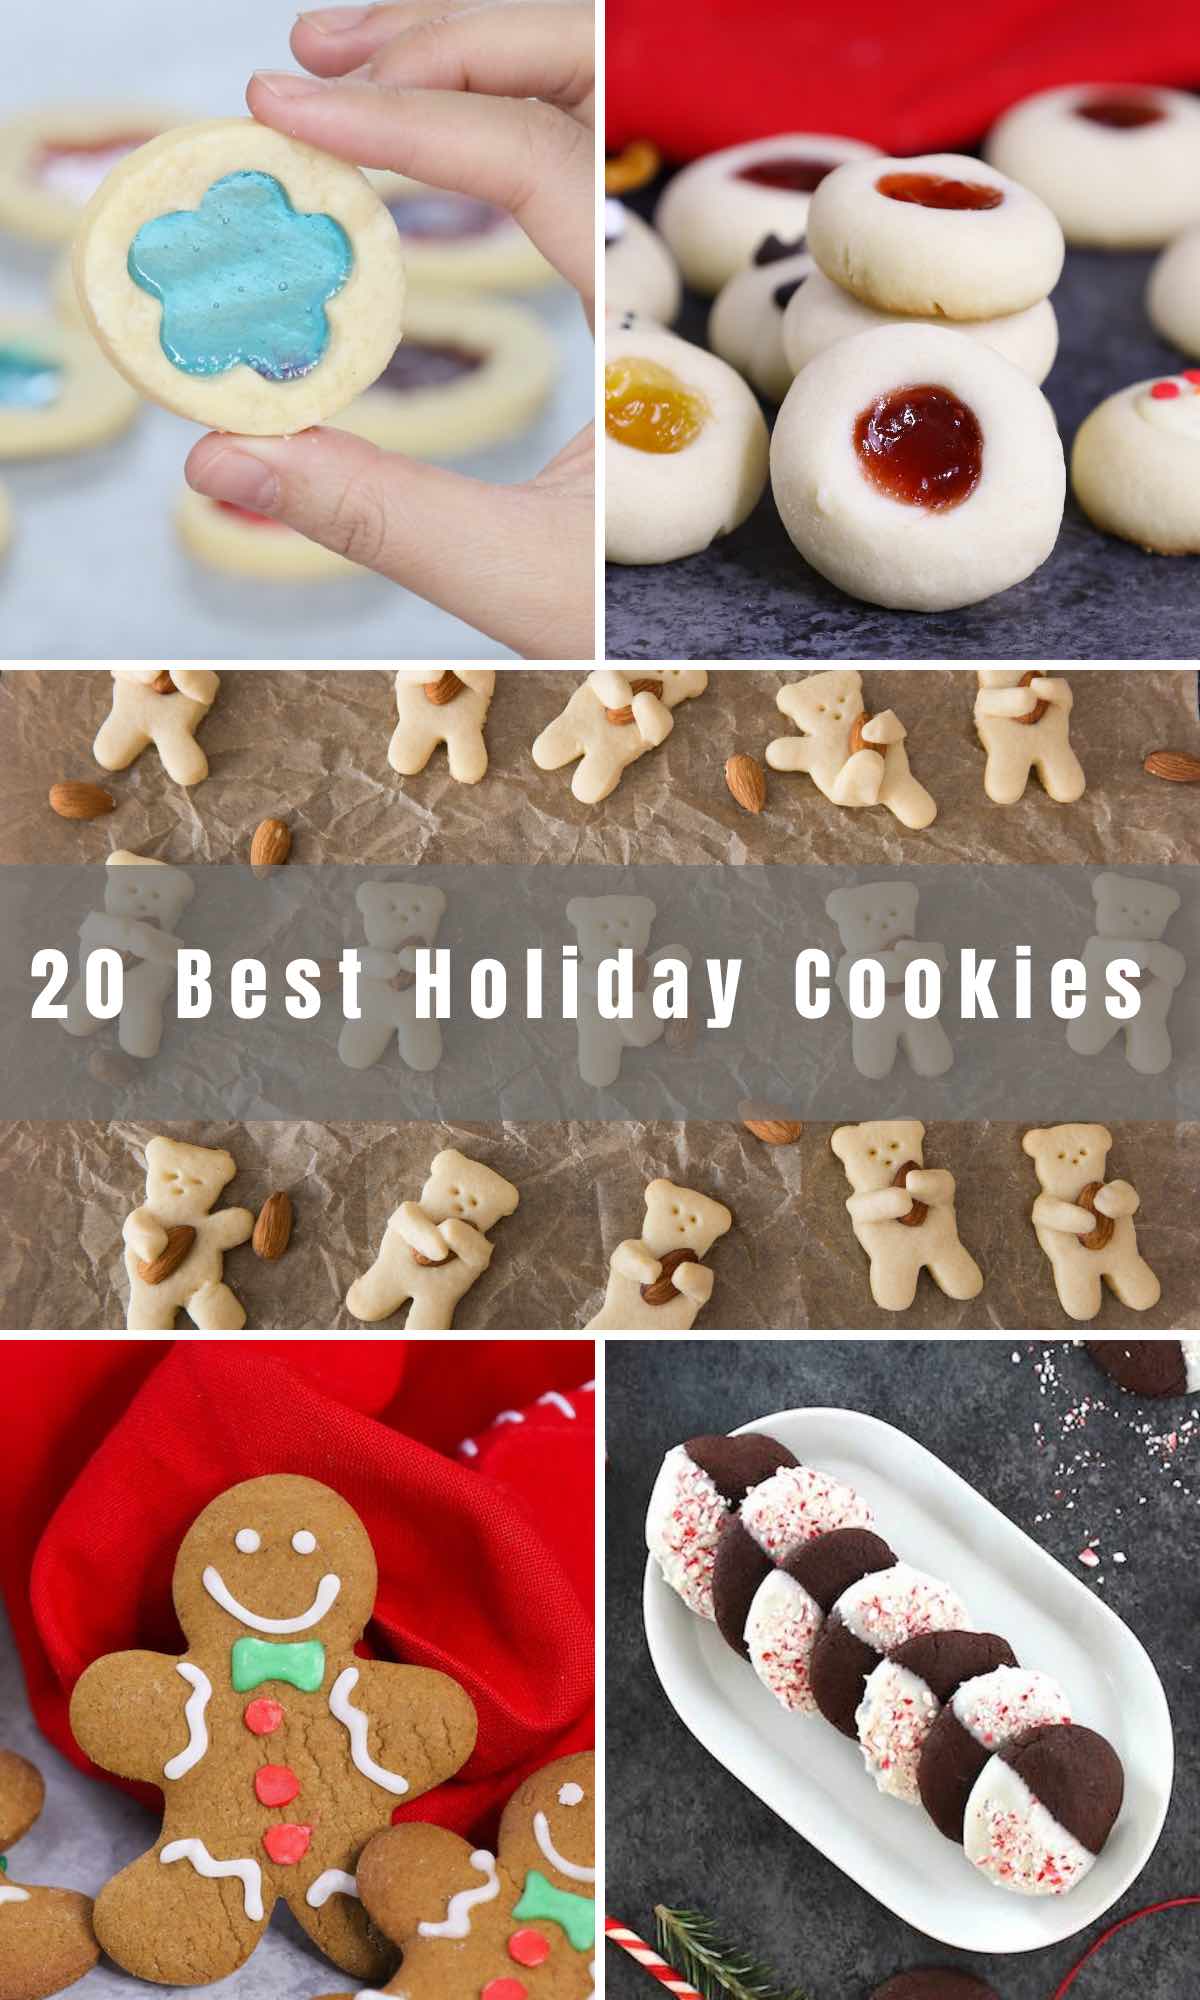 There’s nothing quite as joyful as preparing a fresh batch of cookies to share with family or give away as DIY holiday gifts. We’ve rounded up 20 of the Best Holiday Cookies. During Christmas, Easter and other special holidays, these sweet treats are the perfect way to celebrate. From classics like sugar and gingerbread cookies to new favorites like peanut butter cup cookies, there are so many ways to spread cheer.